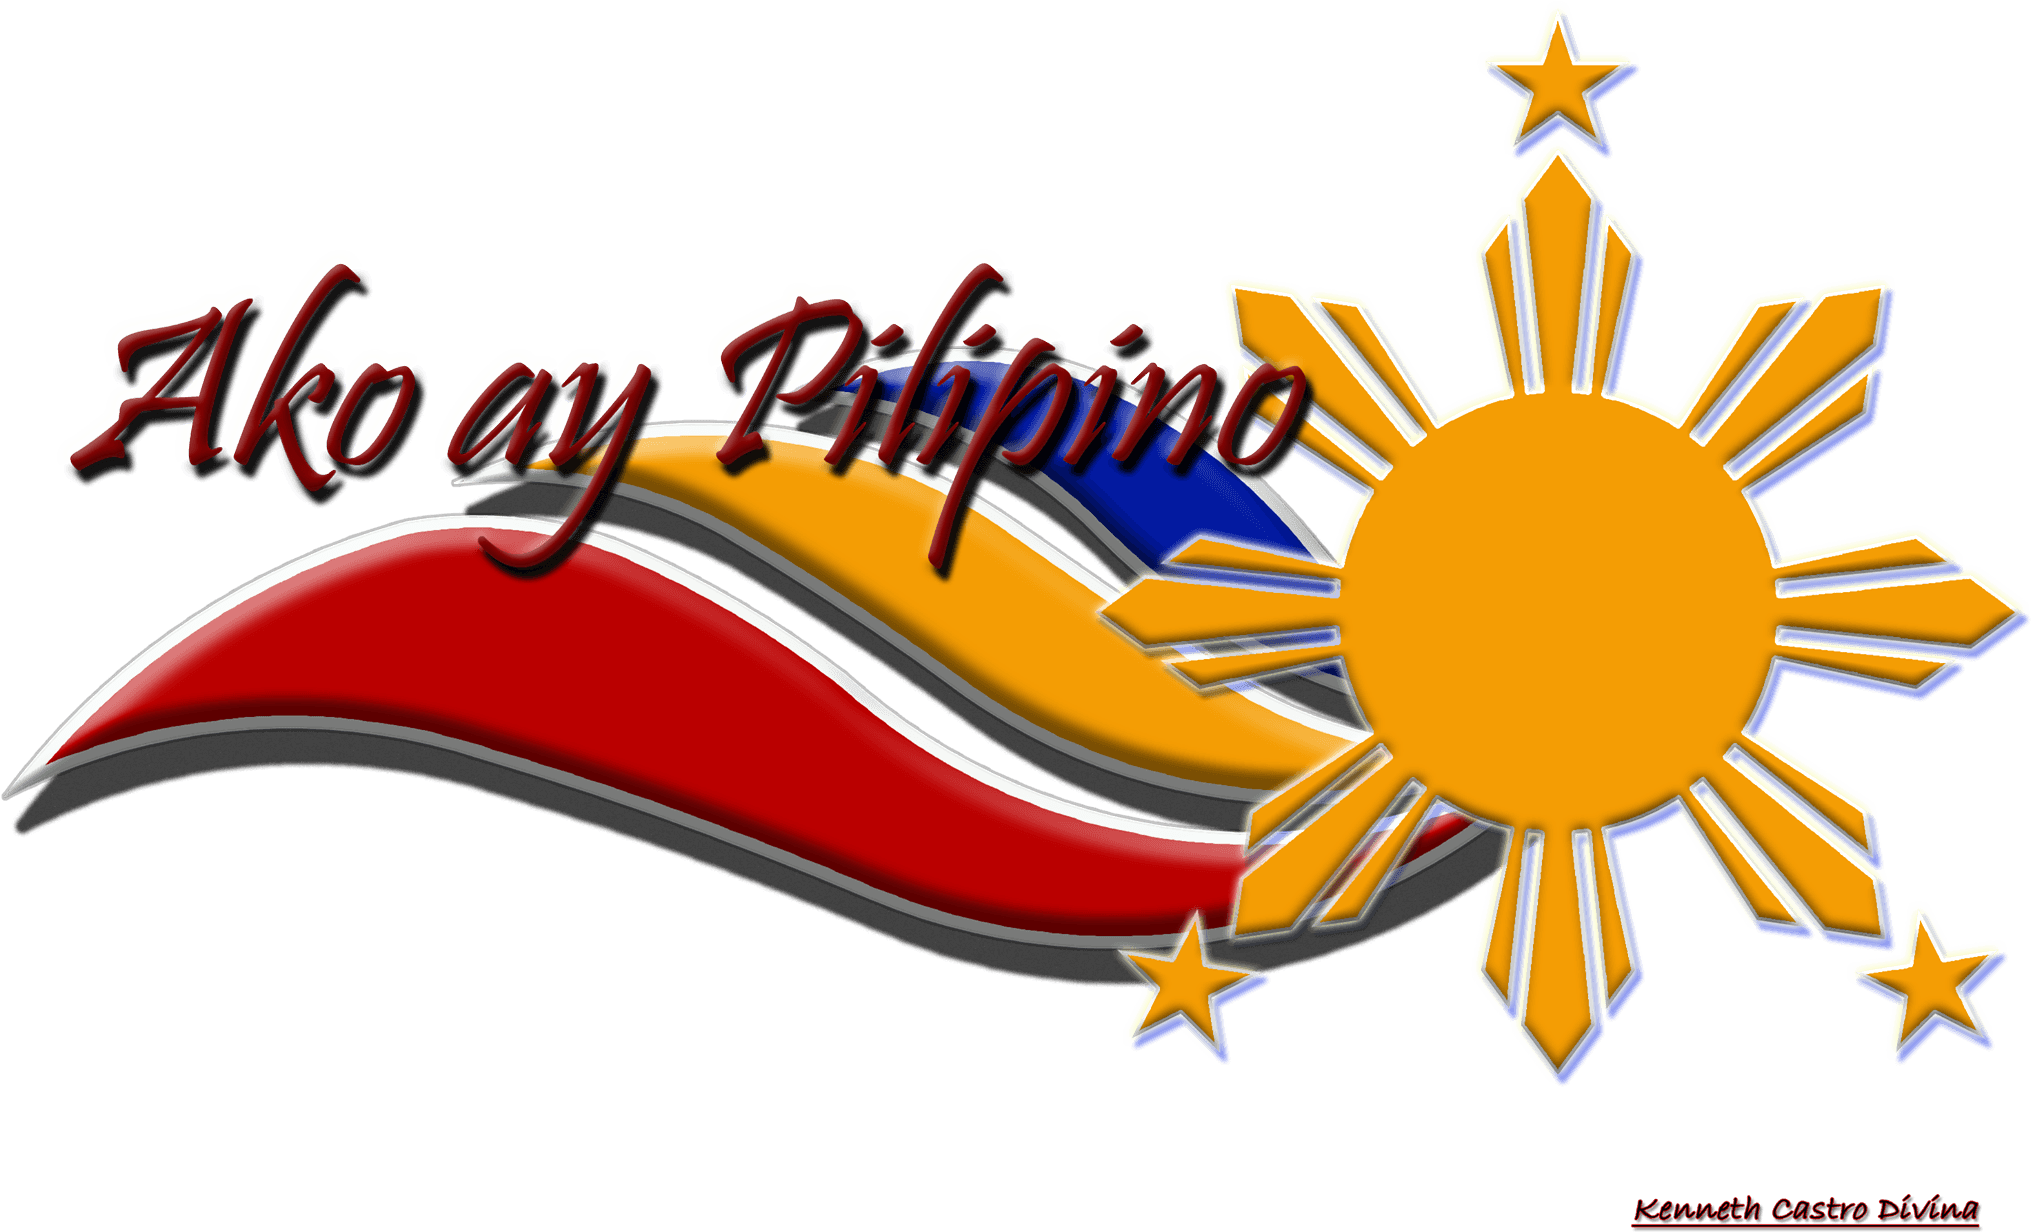 Pinoy Logo - Download While Surfing Looking For The Music On Youtube, I Saw